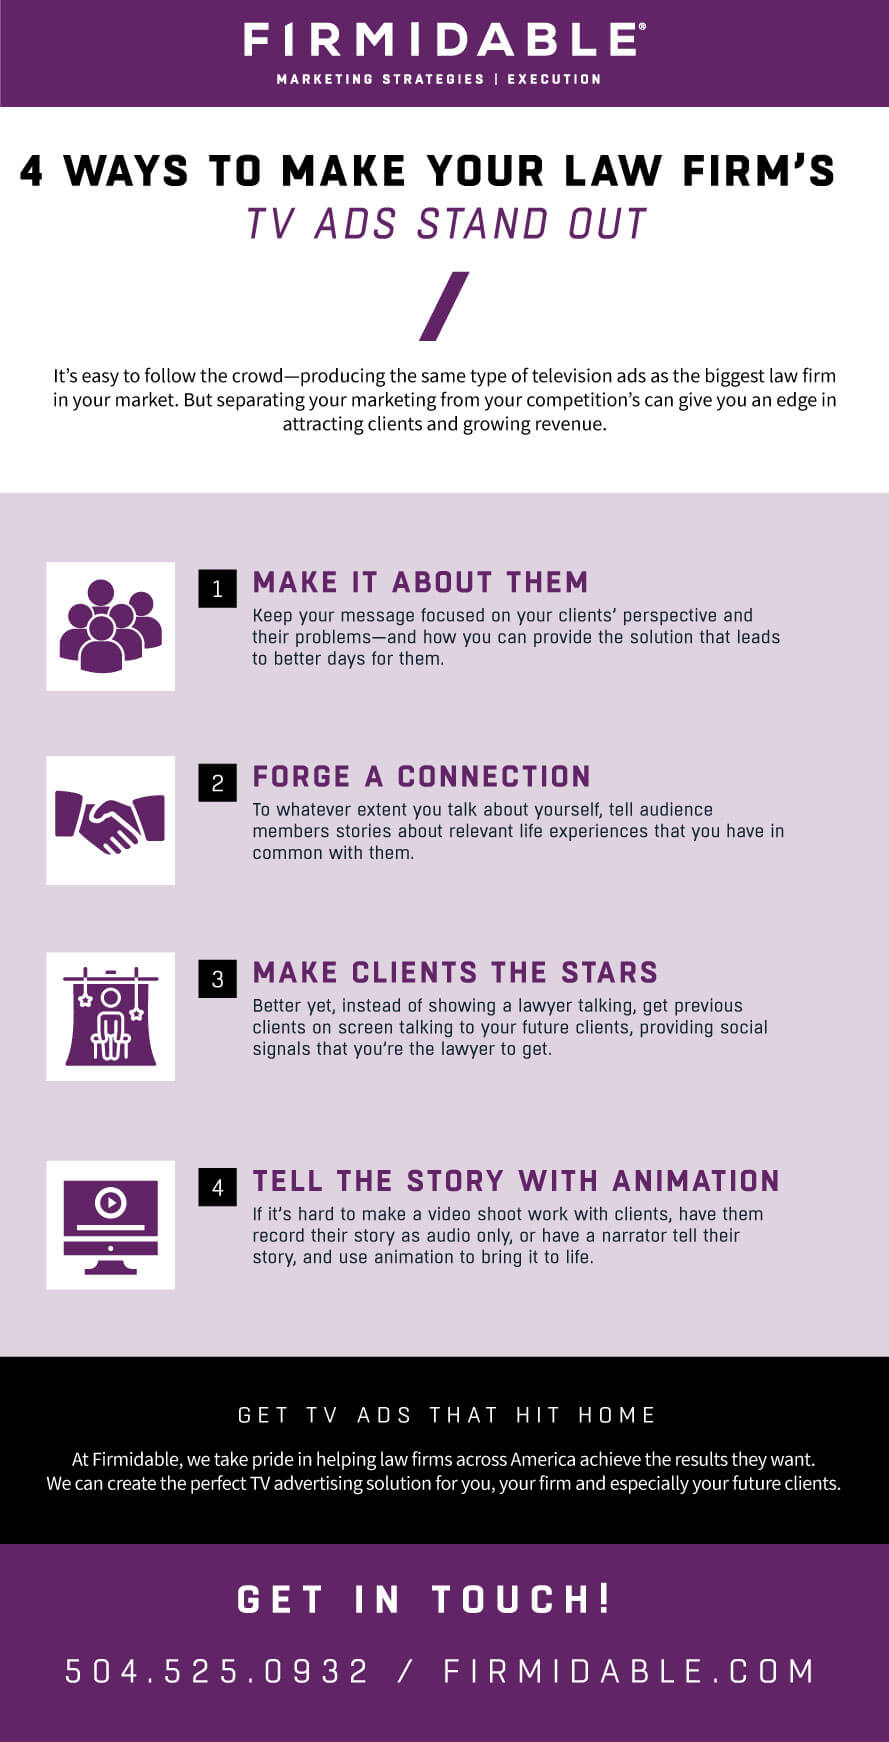 4 Ways To Make Your Law Firm’s TV Ads Stand Out Infographic